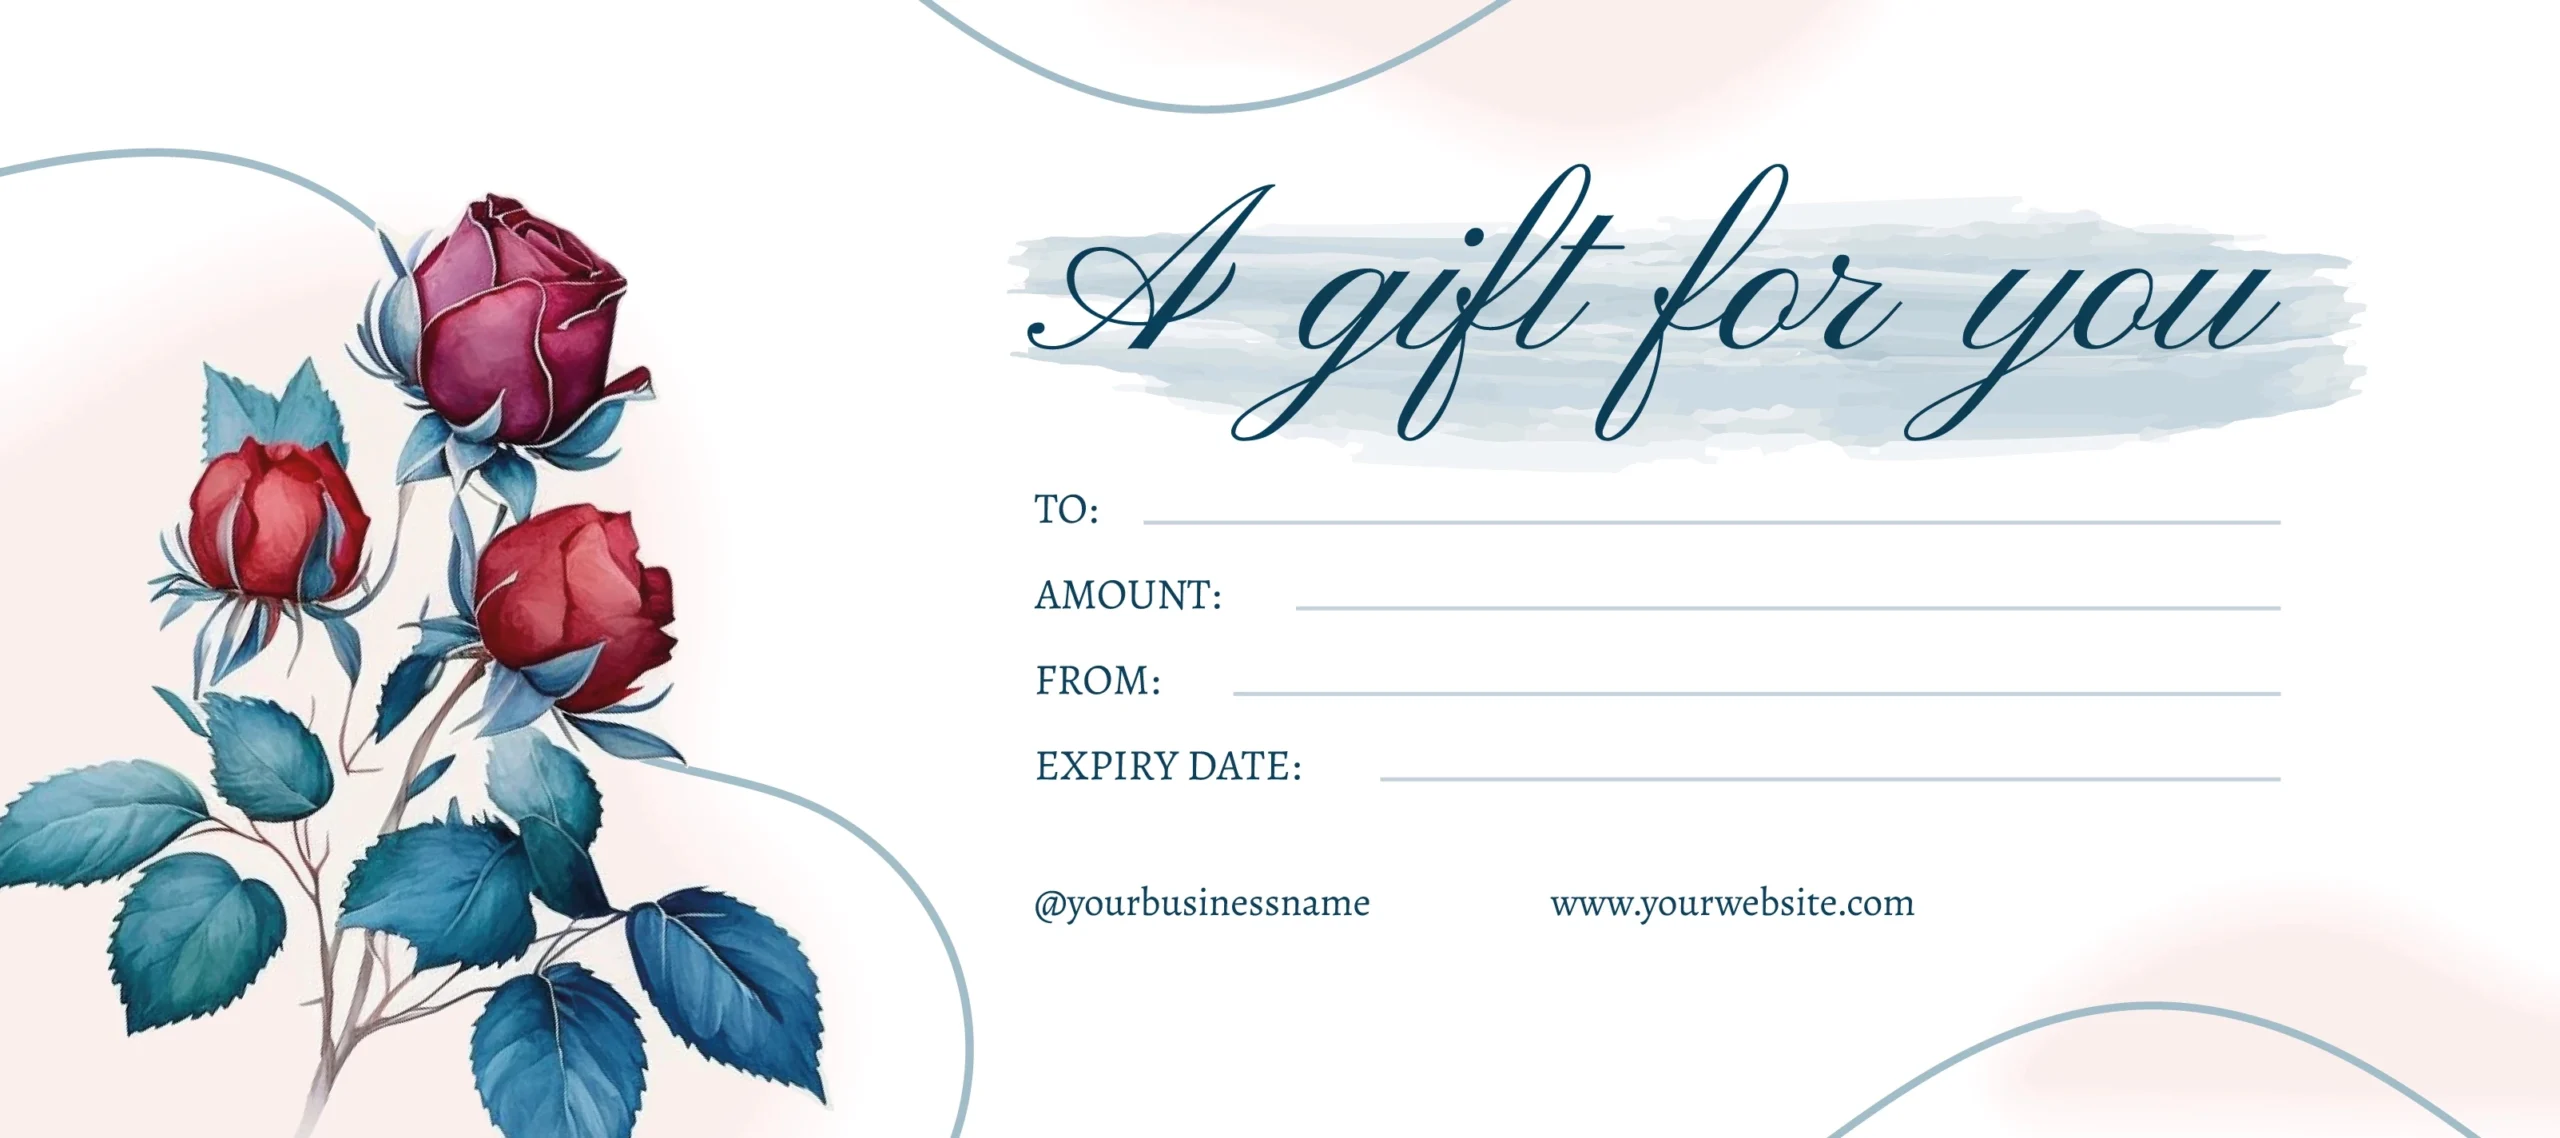 Printable Gift Certificate Free Google Docs Template - Gdoc.io - Printable Gift Cards For Free